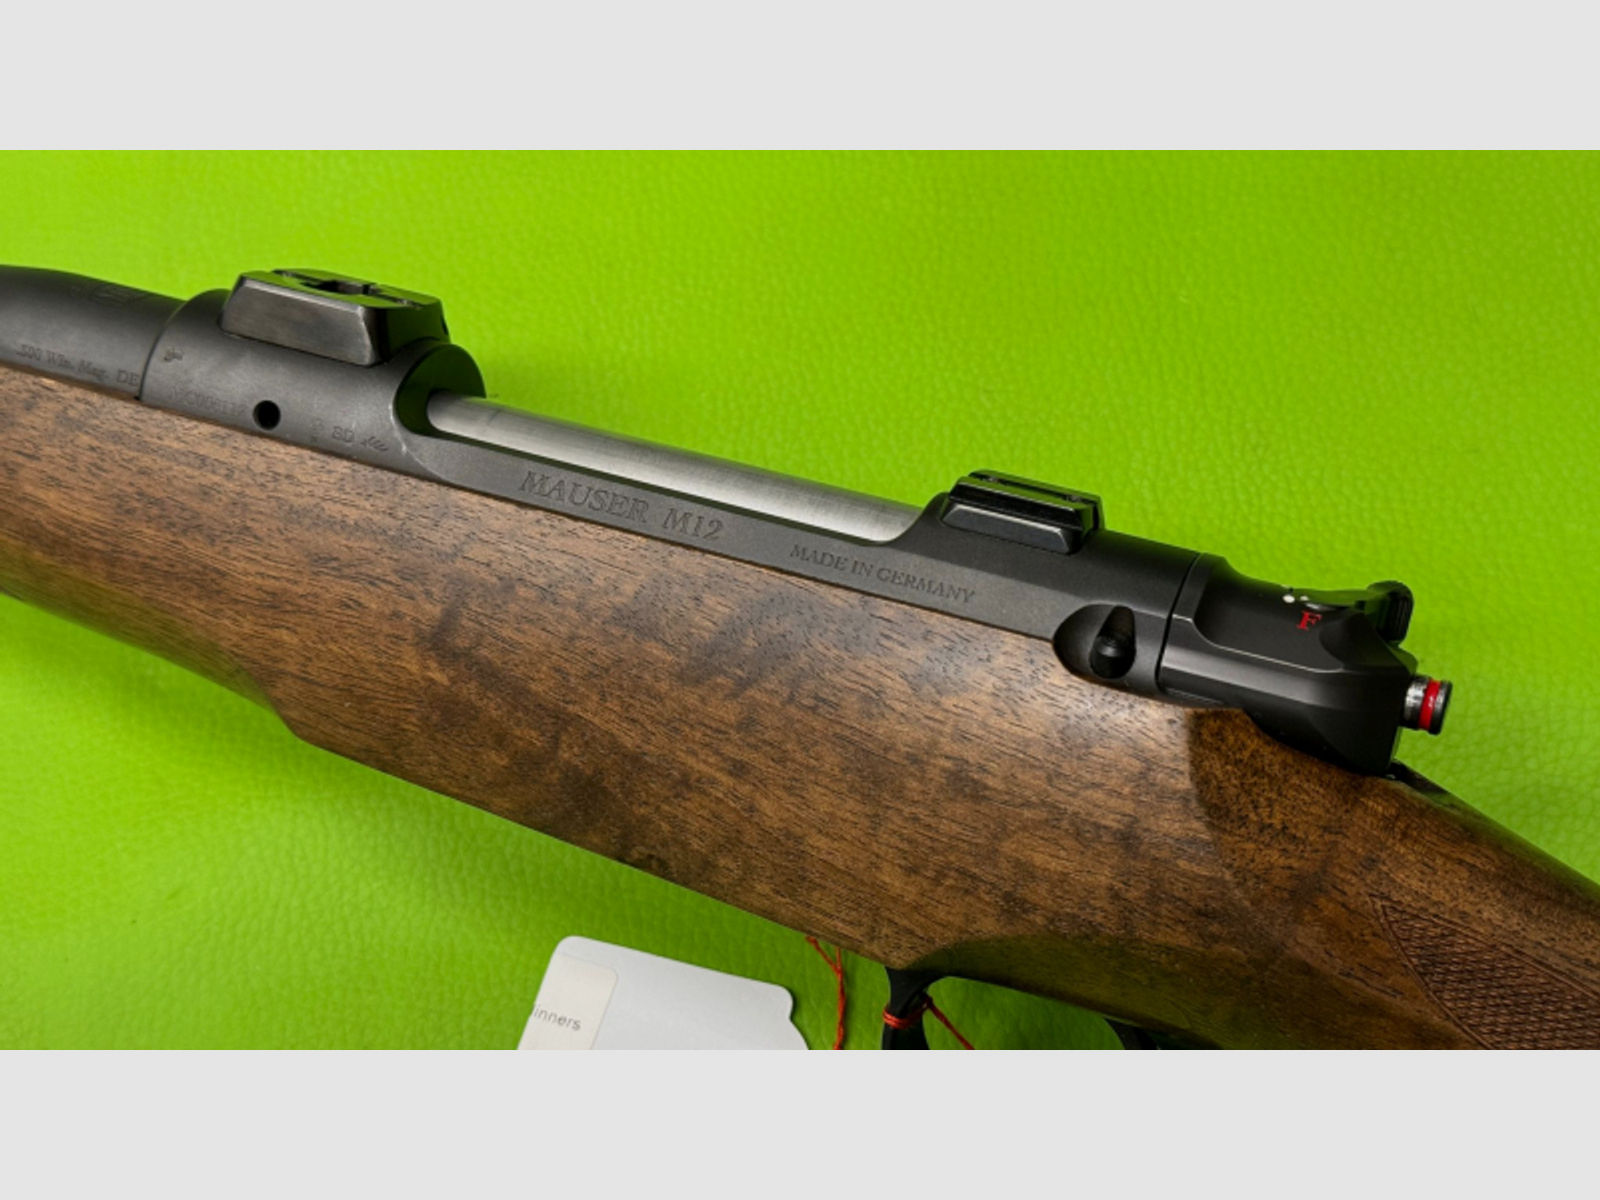 Repetierbüchse Mauser M12 Pure .300WinMag | 58cmLL | M15x1